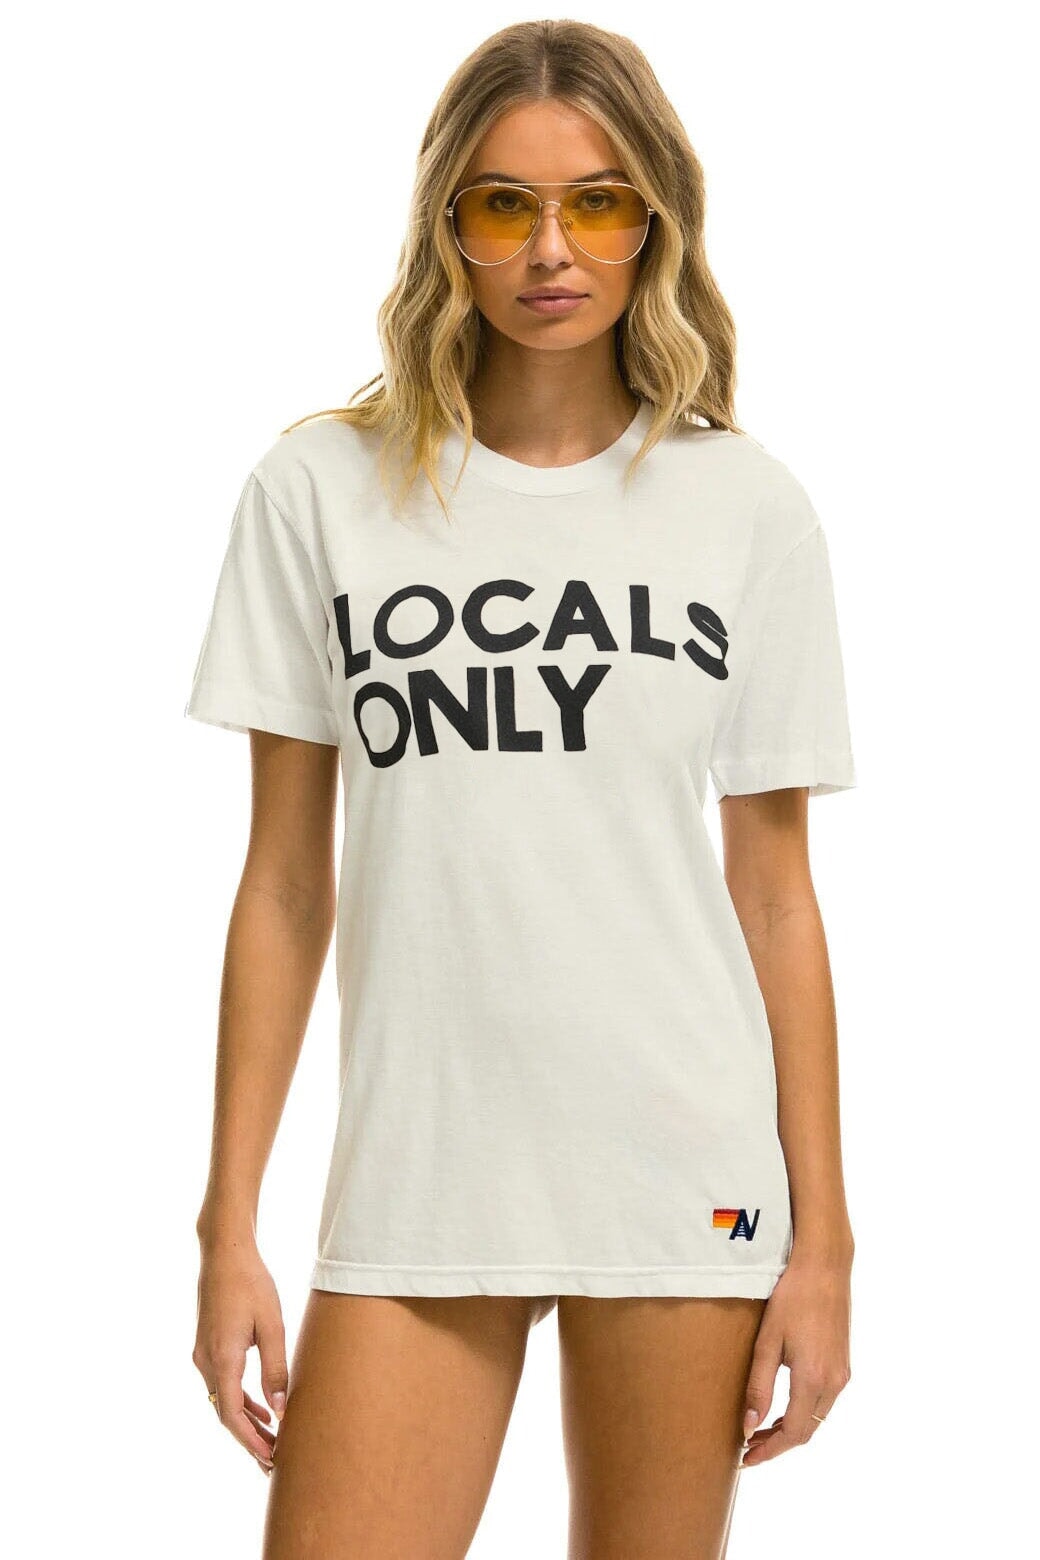 LOCALS ONLY TEE - VINTAGE WHITE Tees Aviator Nation 